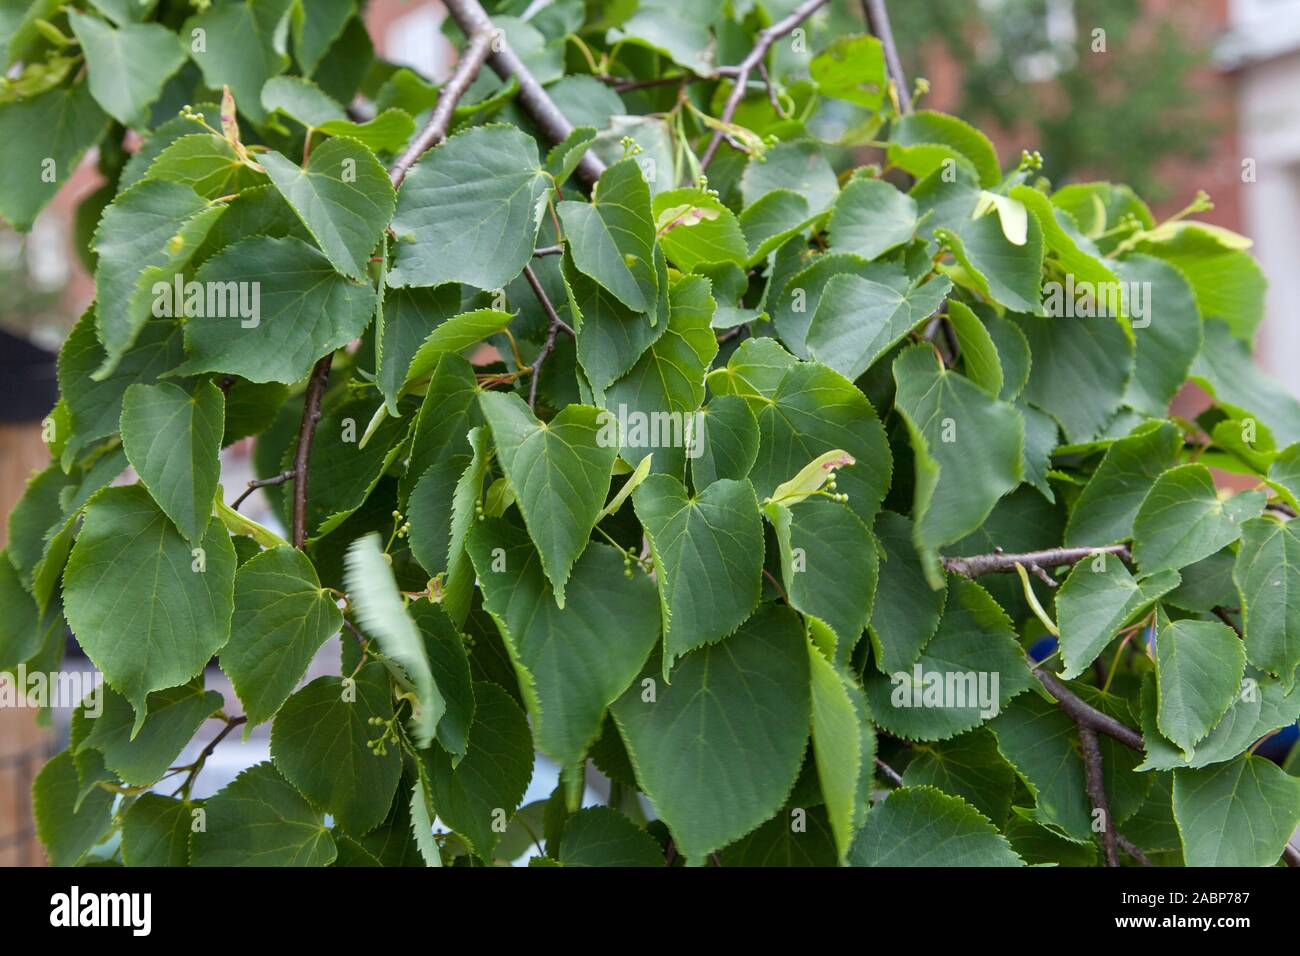 Cordate or heart-shaped leaves of small-leaved lime (Tilia cordata) street tree in summer, London, UK Stock Photo